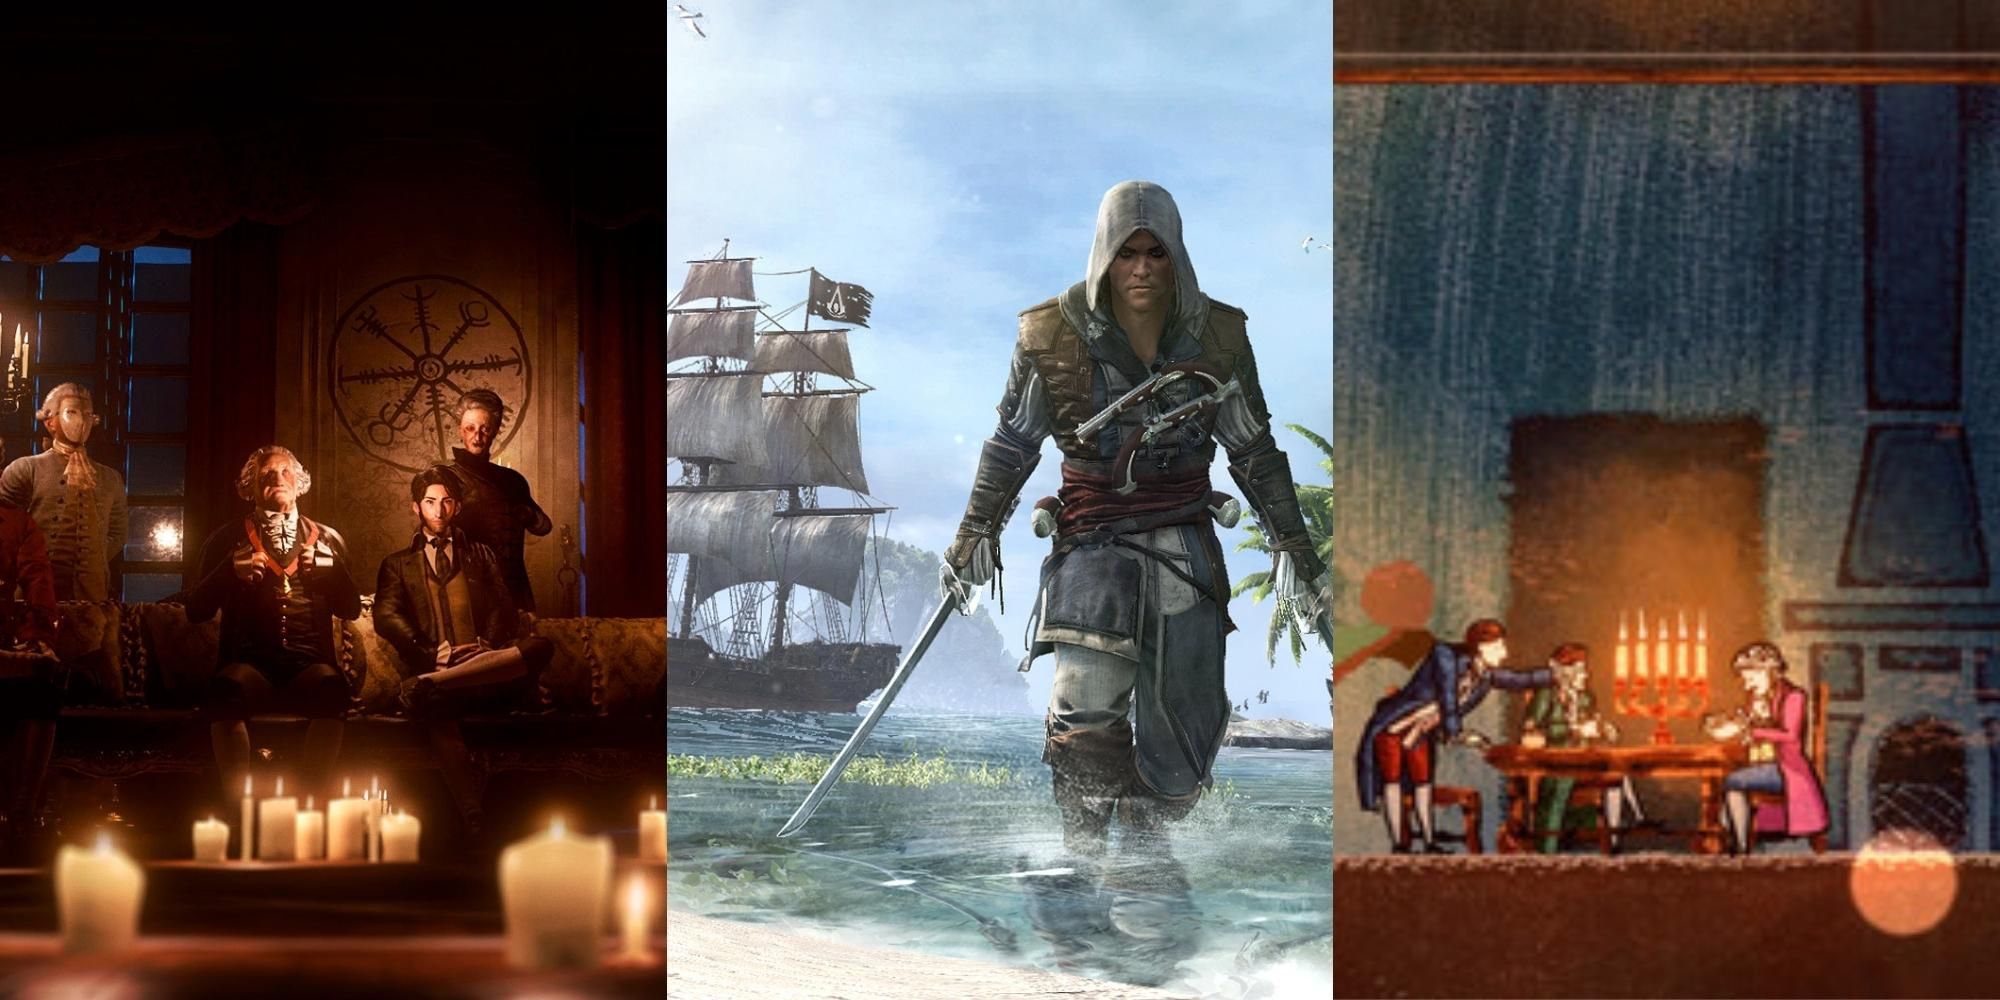 council members in The Council, Edward in Assassin’s Creed IV Black Flag, people in the tavern in Card Shark